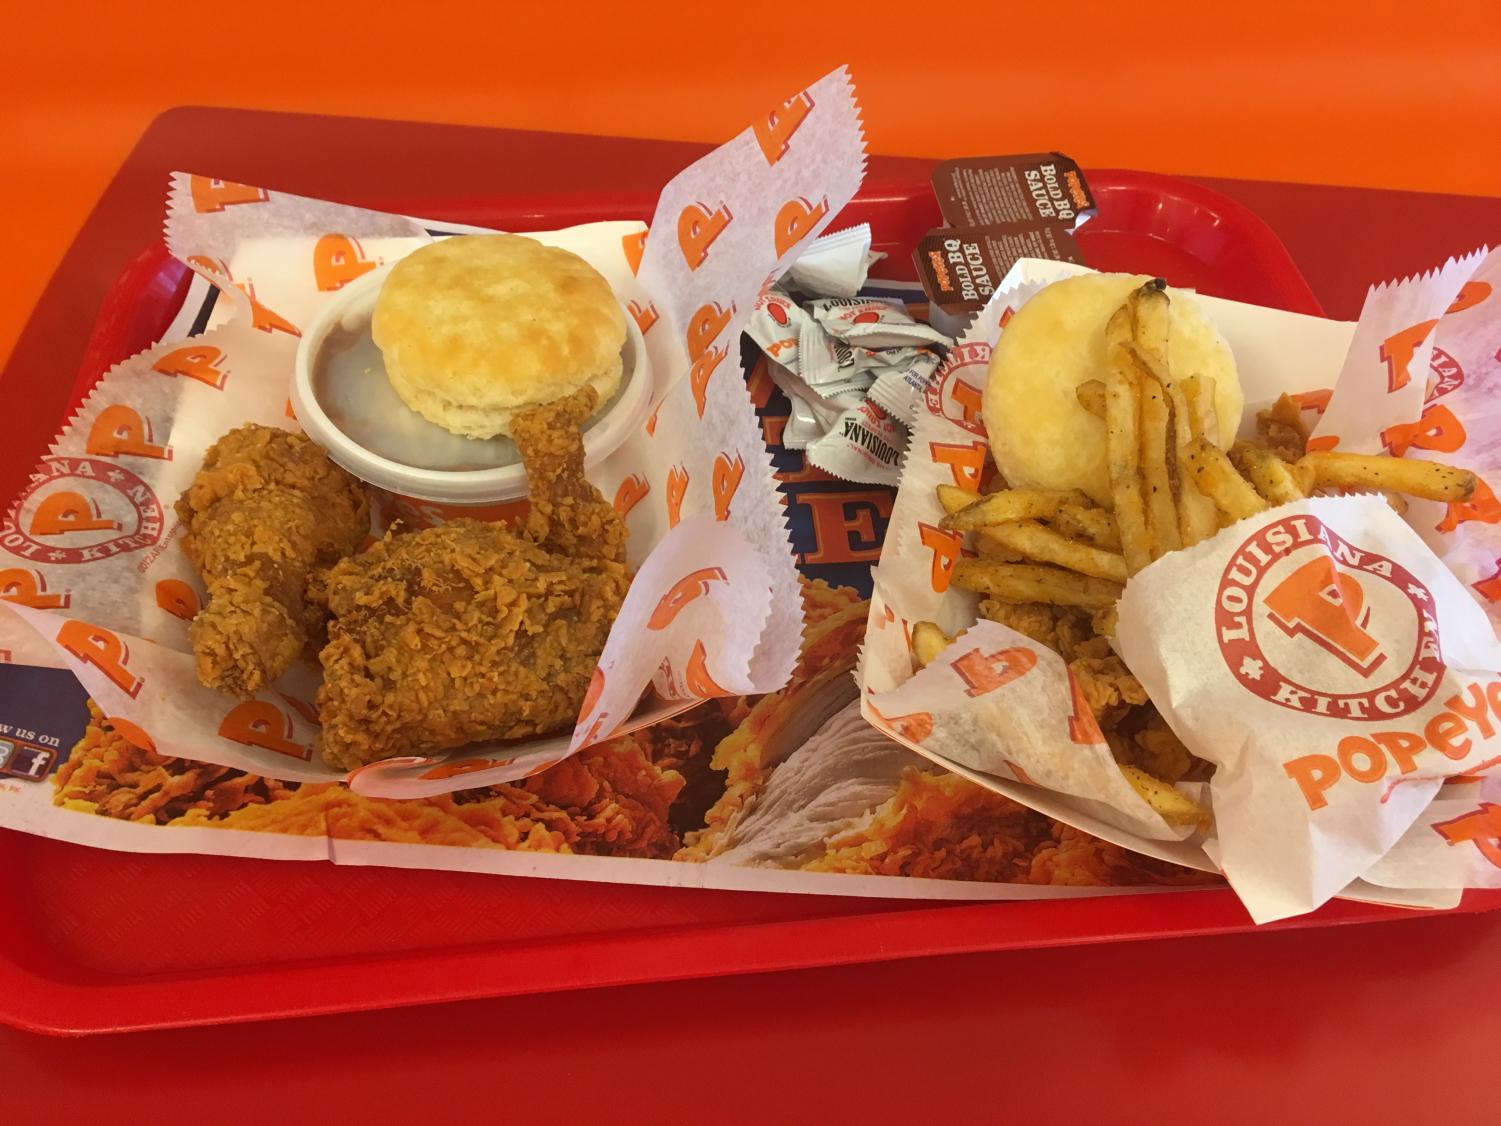 Popeyes+vs.+Chick-Fil-A%3A+Which+Fried+Chicken+Chain+is+Better%3F